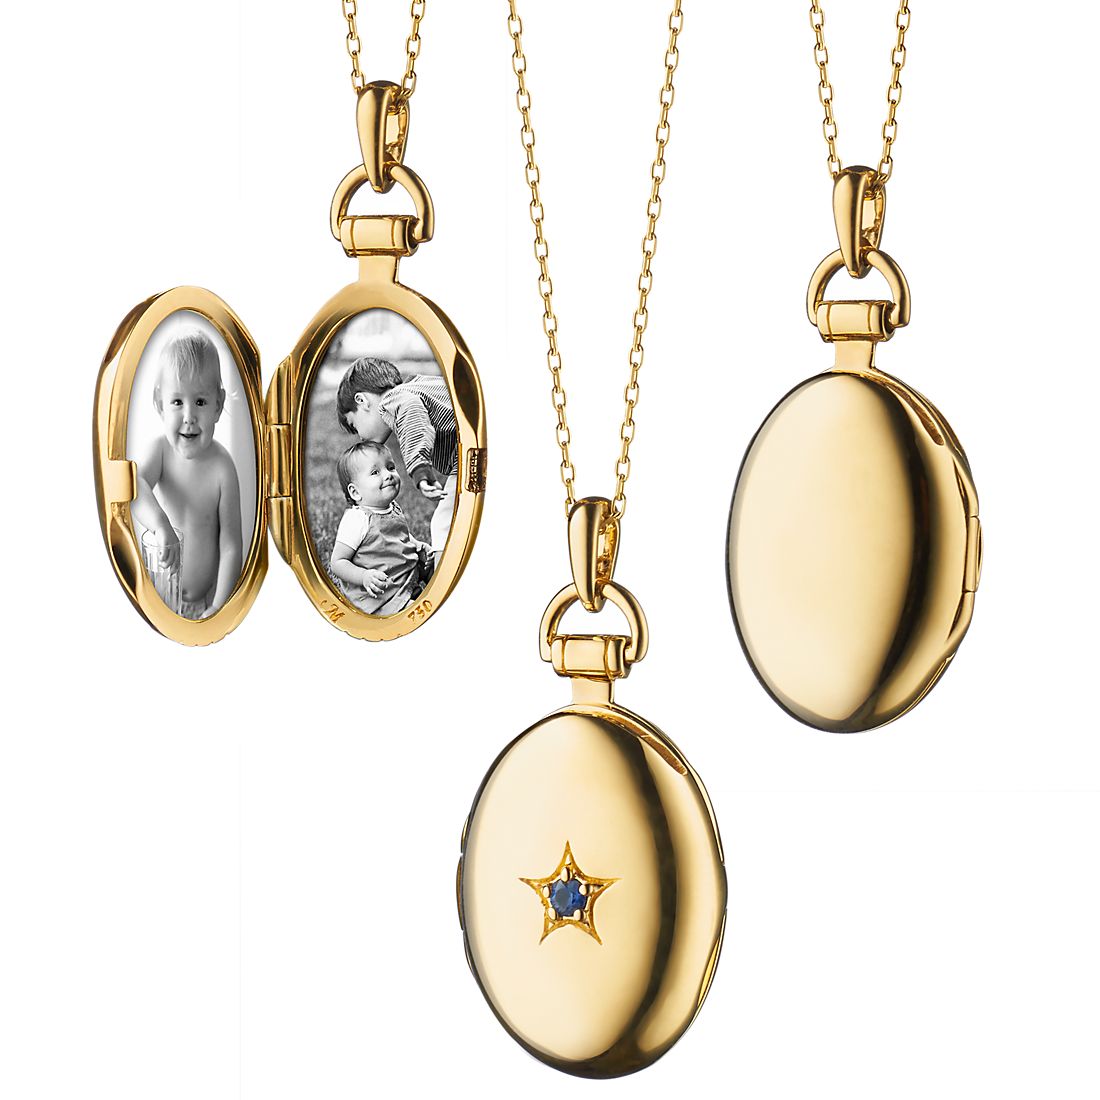 Oval yellow gold and sapphire locket with black and white photos of children inside.